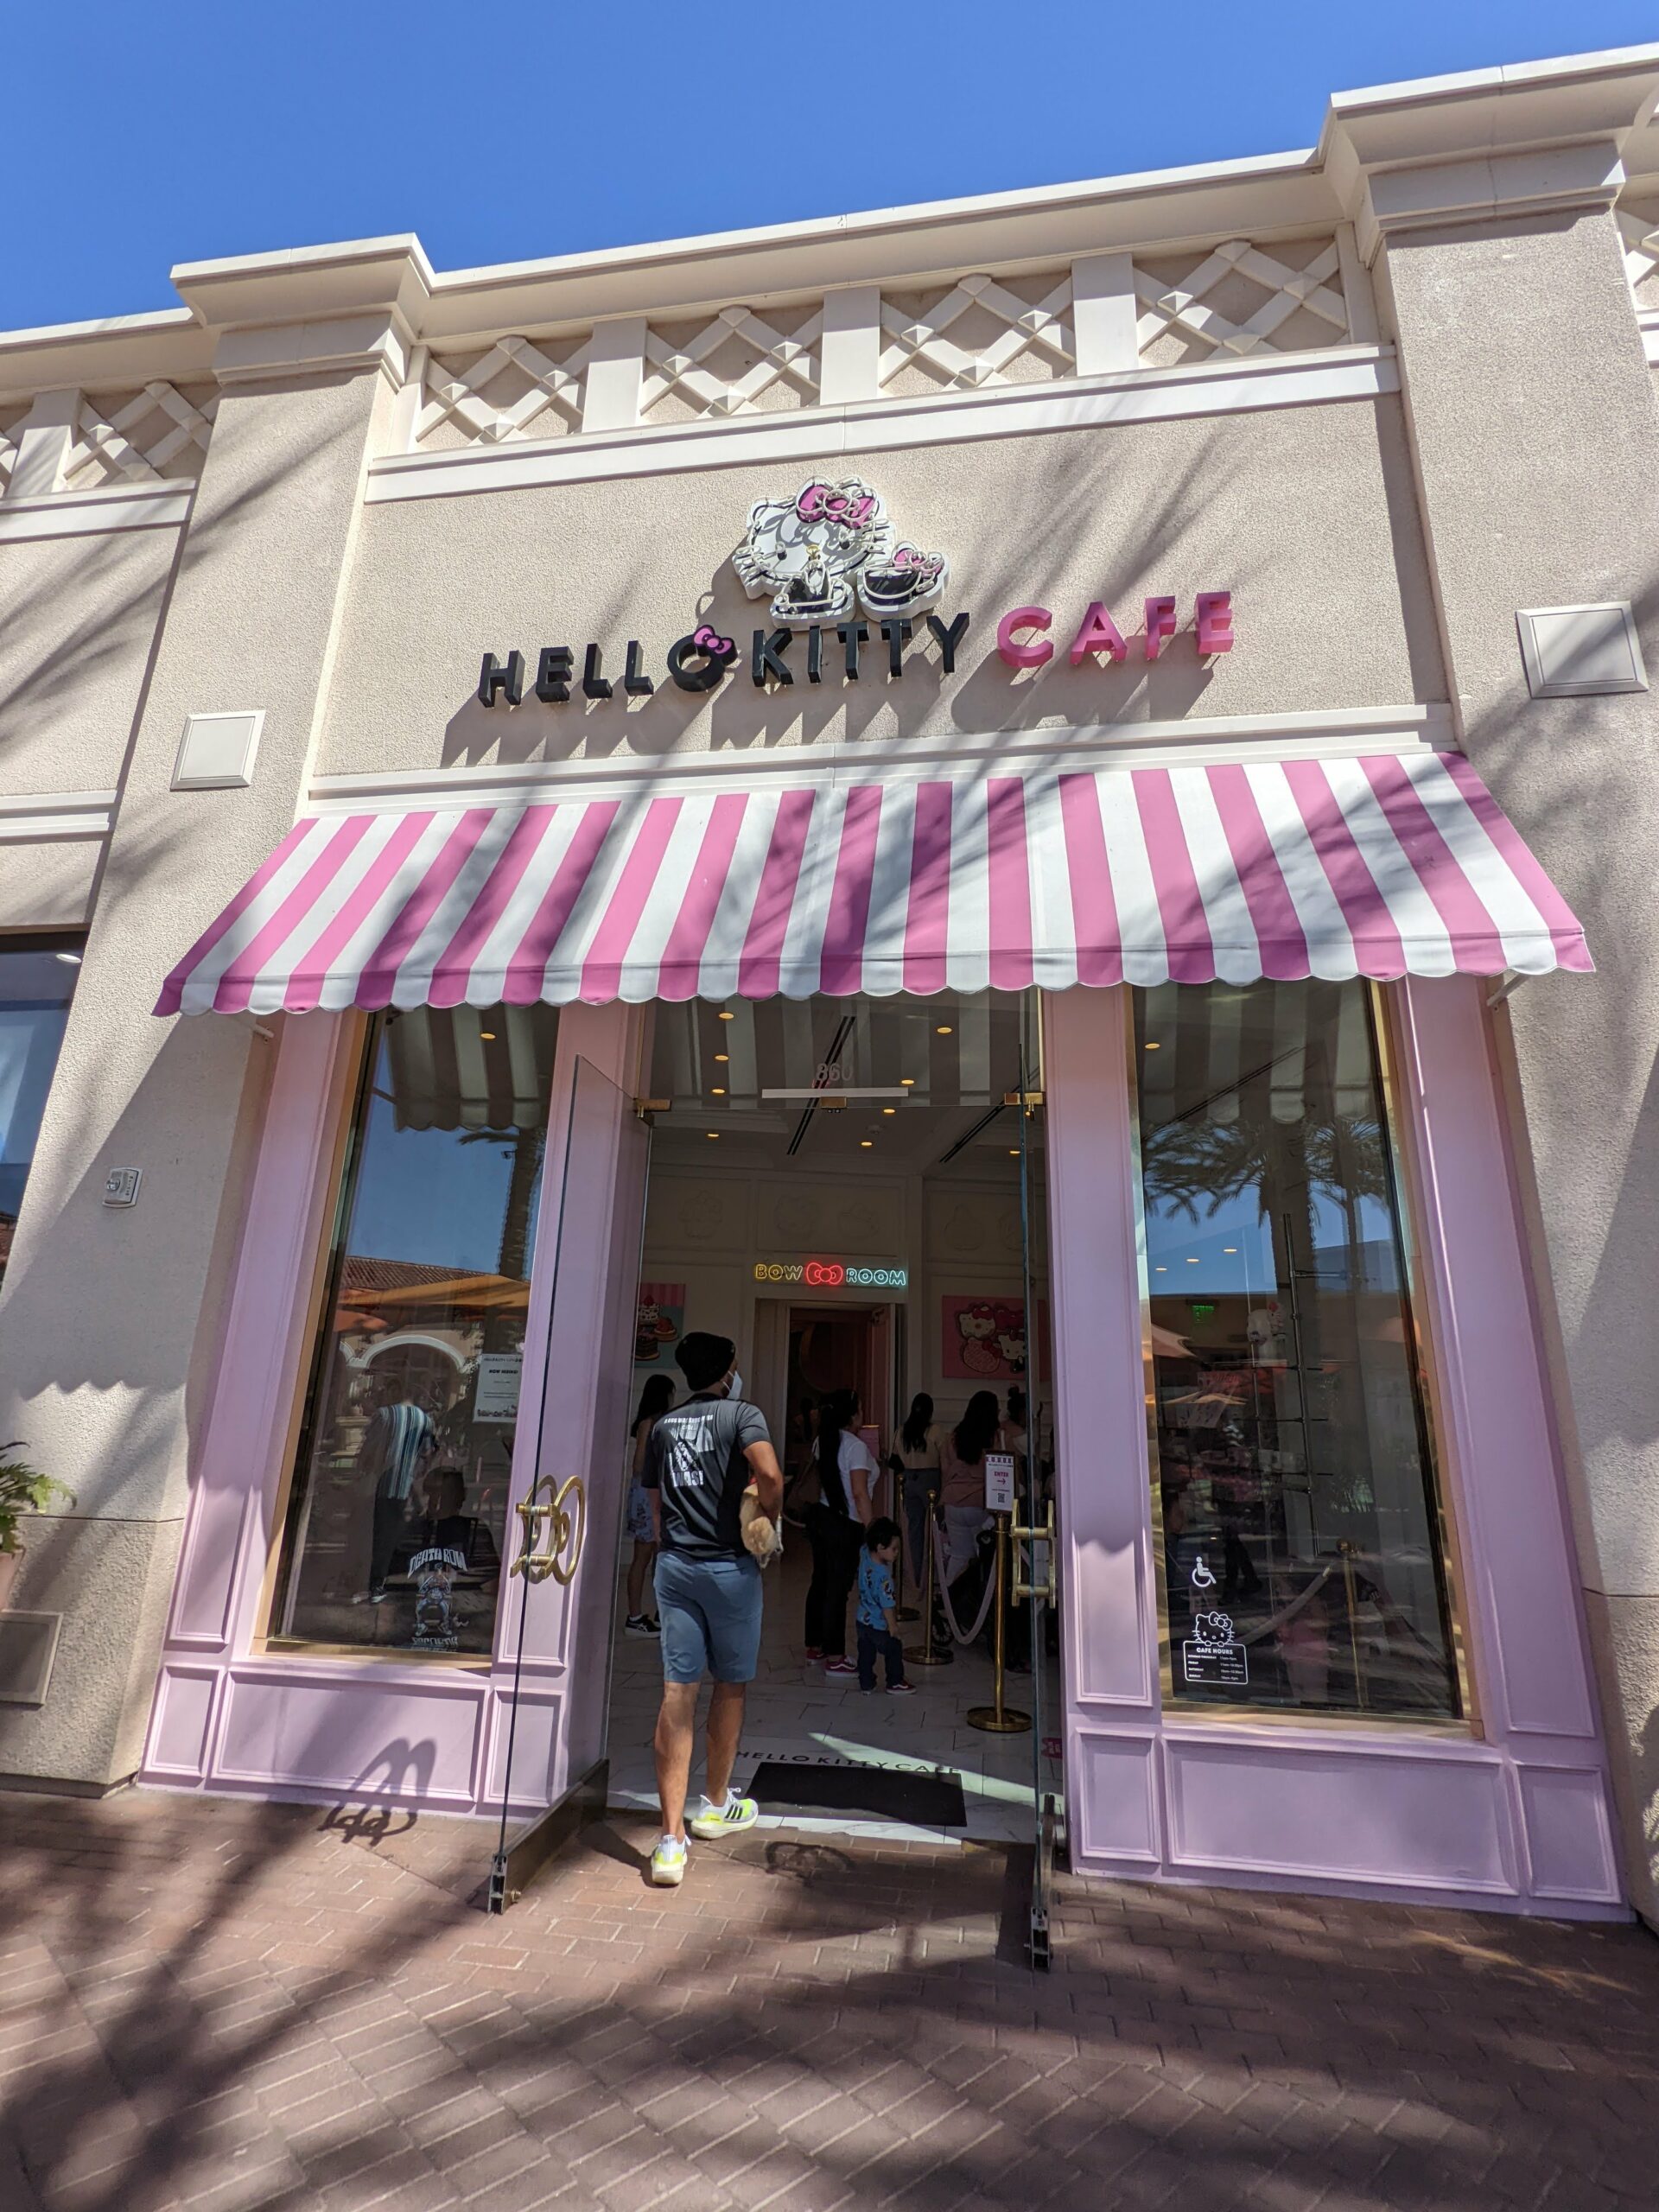 HELLO KITTY CAFE IN LAS VEGAS- Brand New Location at Fashion Show